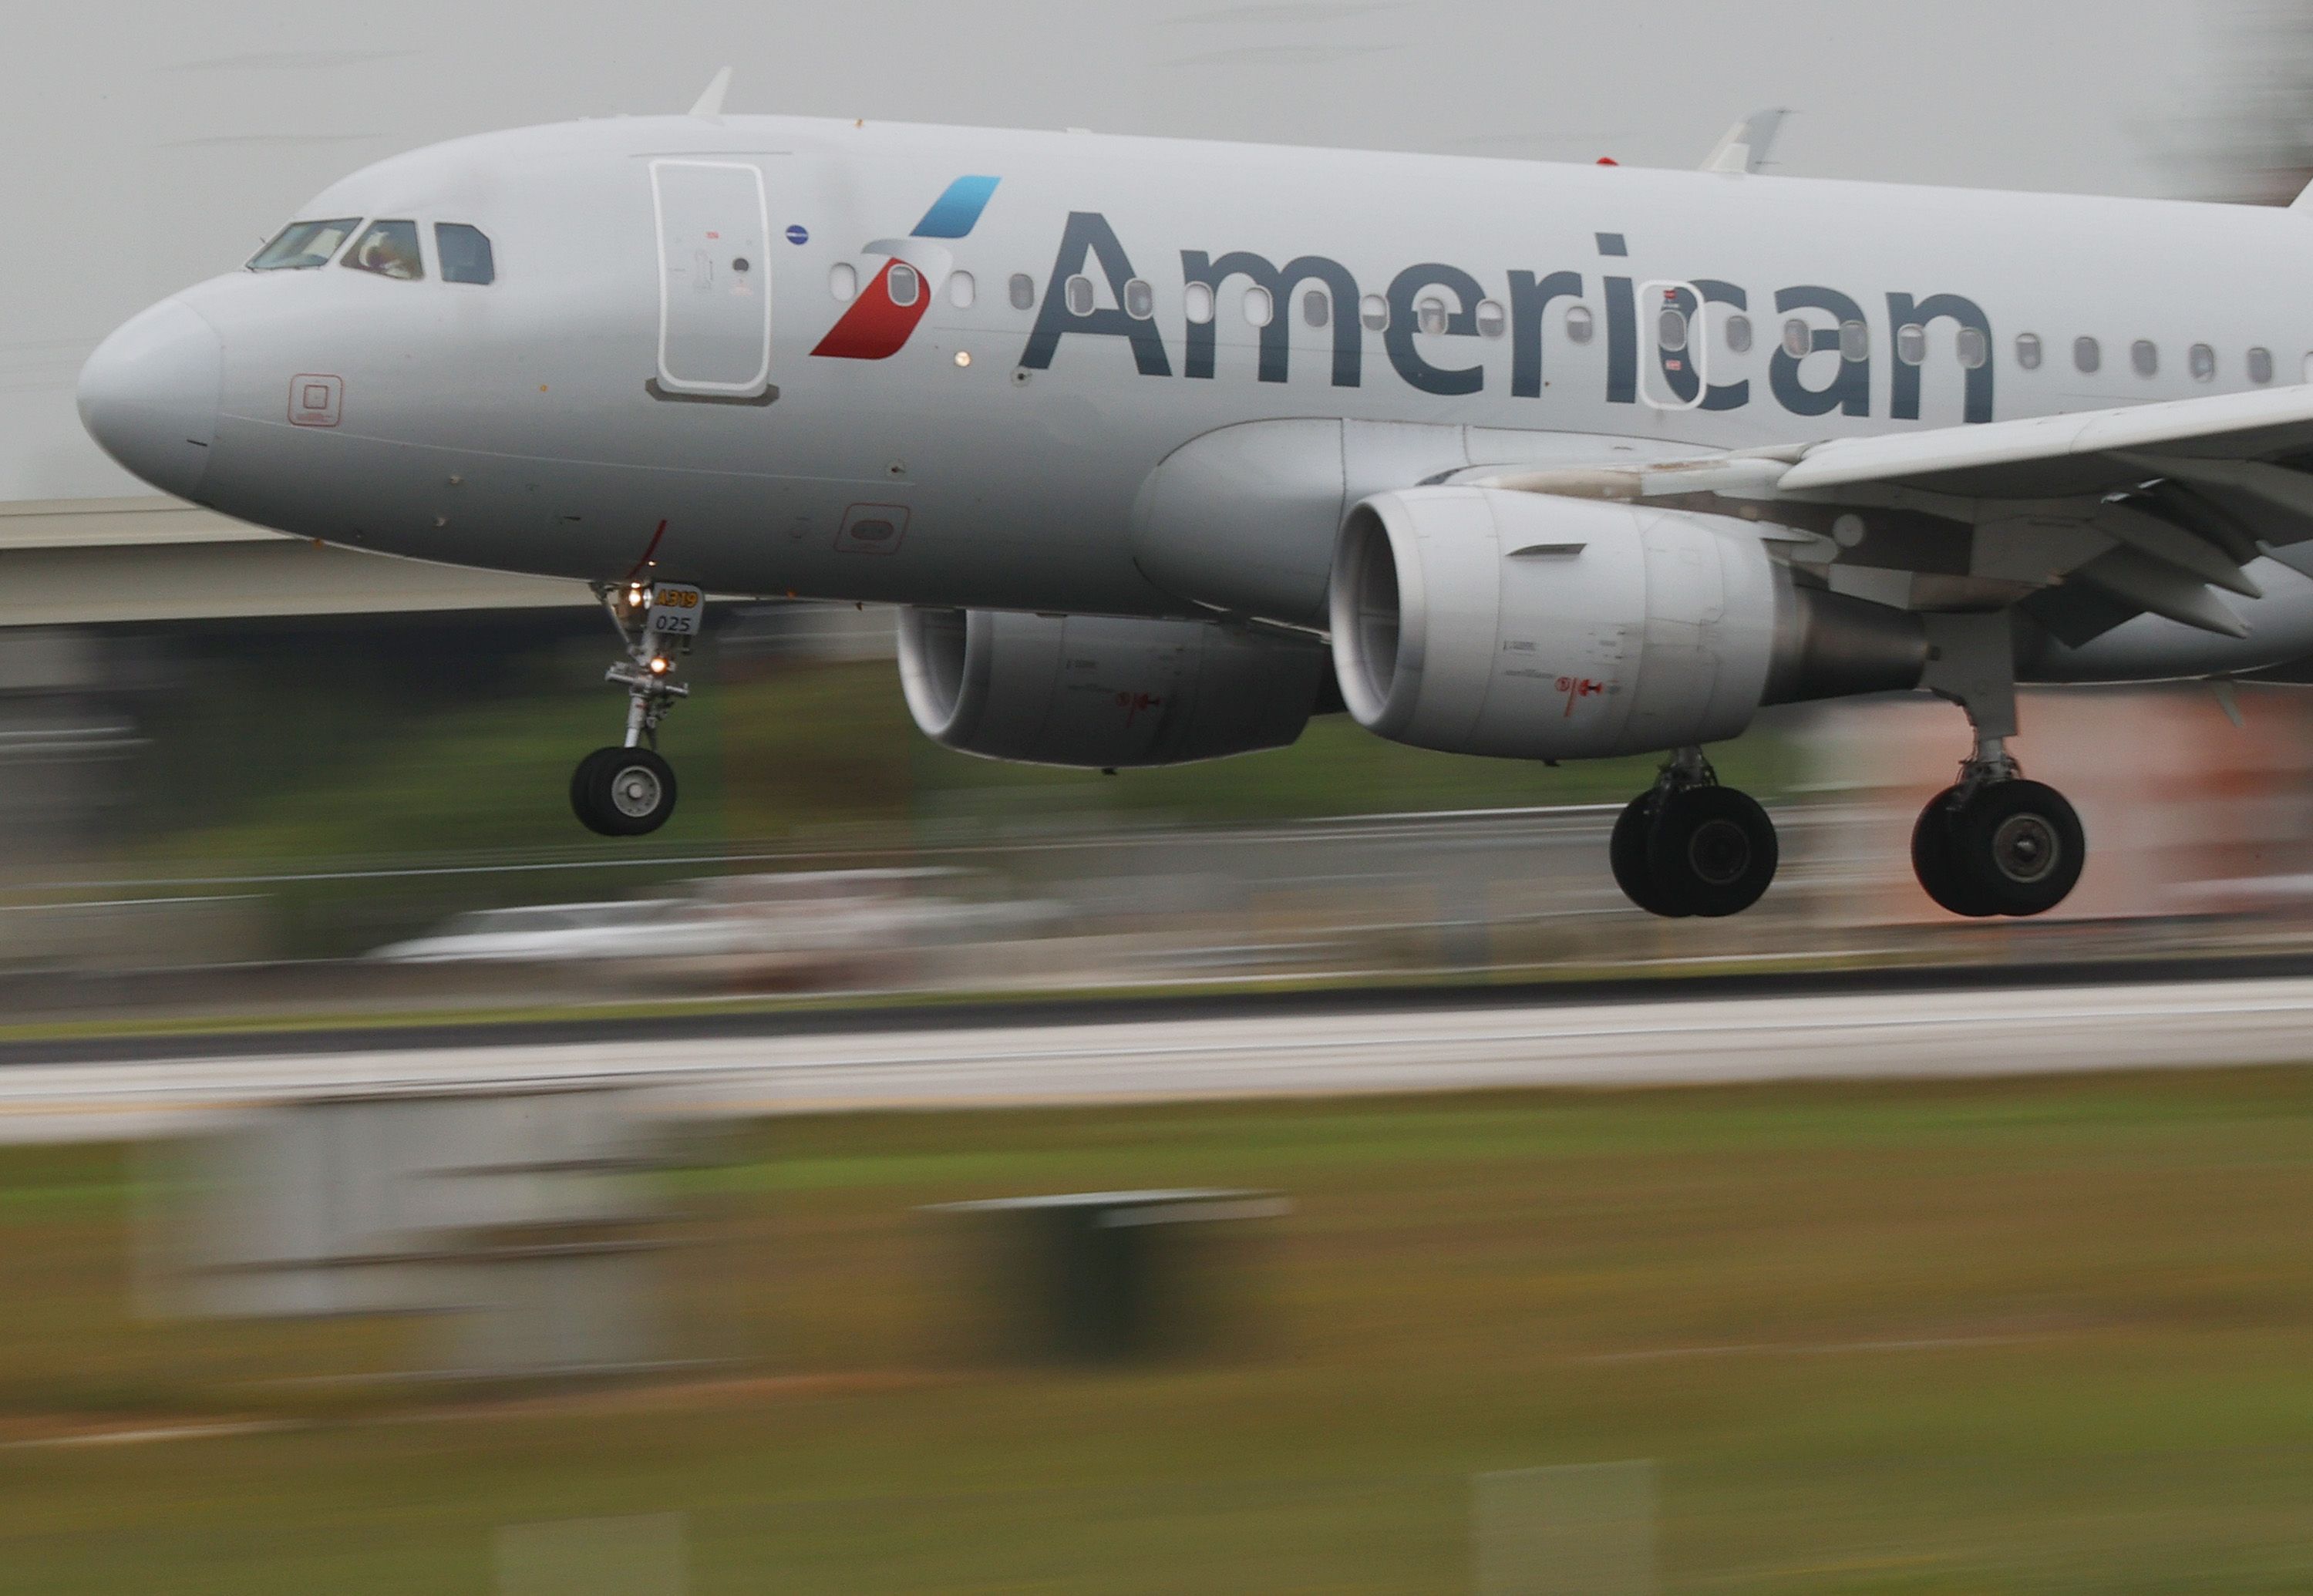 An American Airlines aircraft taking off